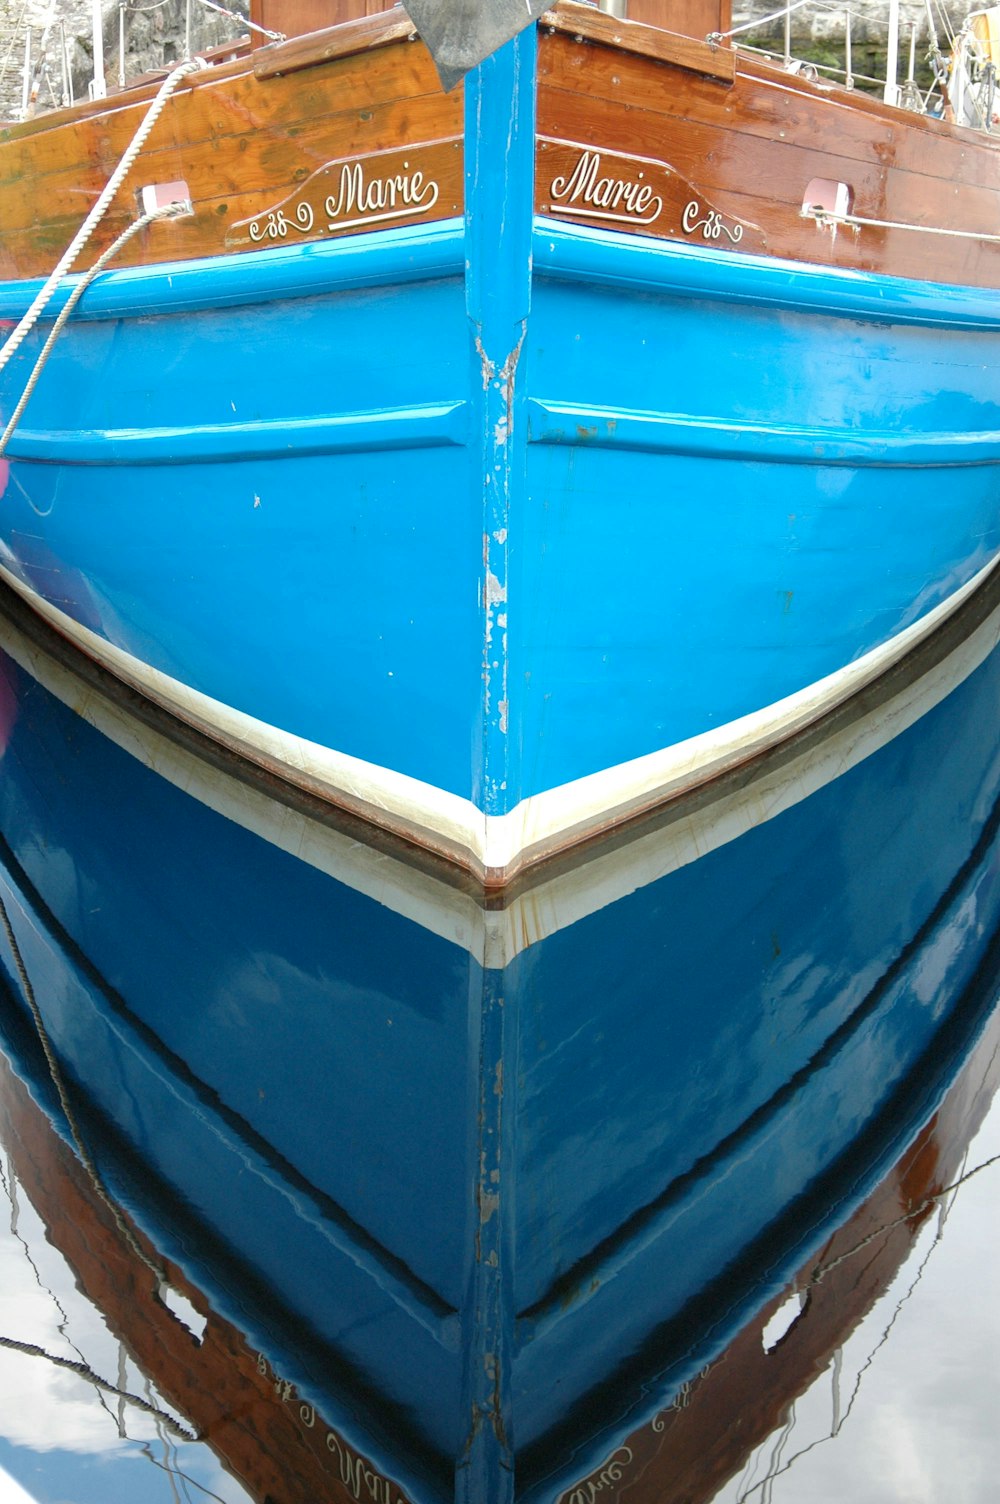 a blue boat is docked in the water